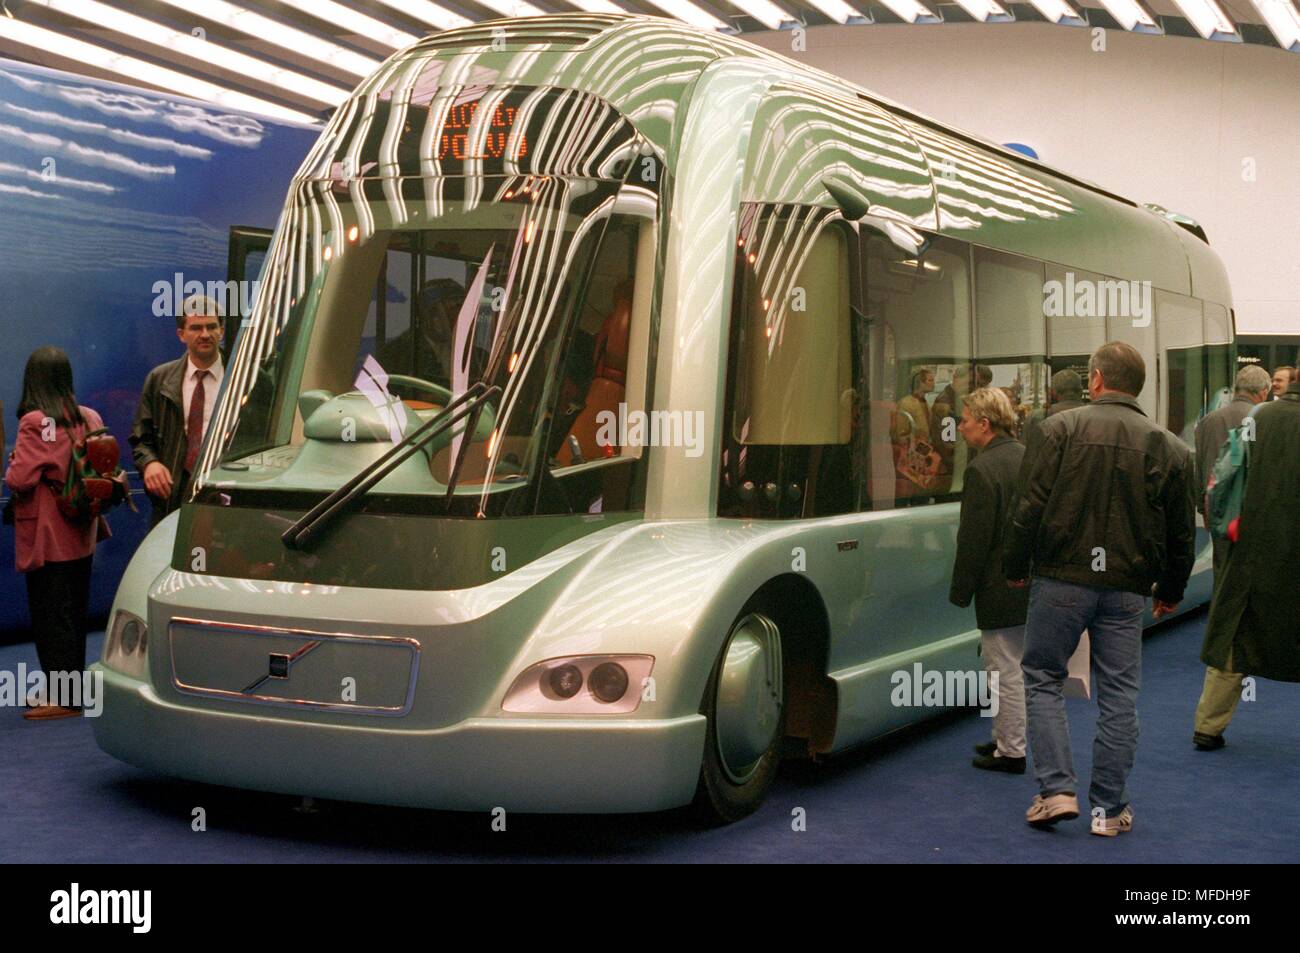 A bus for the future will be presented at the IAA Commercial Vehicles in Hanover until 29.9.1996 by the Swedish exhibitor Volvo. 24.9. Forthcoming is the unusual design of the aluminum body. The driver's seat is in the withte, video cameras instead of rear-view mirrors provide information to the driver. The bus can be lowered to Burgersteighohe. The test prototype is powered by batteries and a gas turbine with integrated high-speed generator. They make about 150 hp. 80 passengers can be brought by bus (of which up to 33 are seated). | usage worldwide Stock Photo